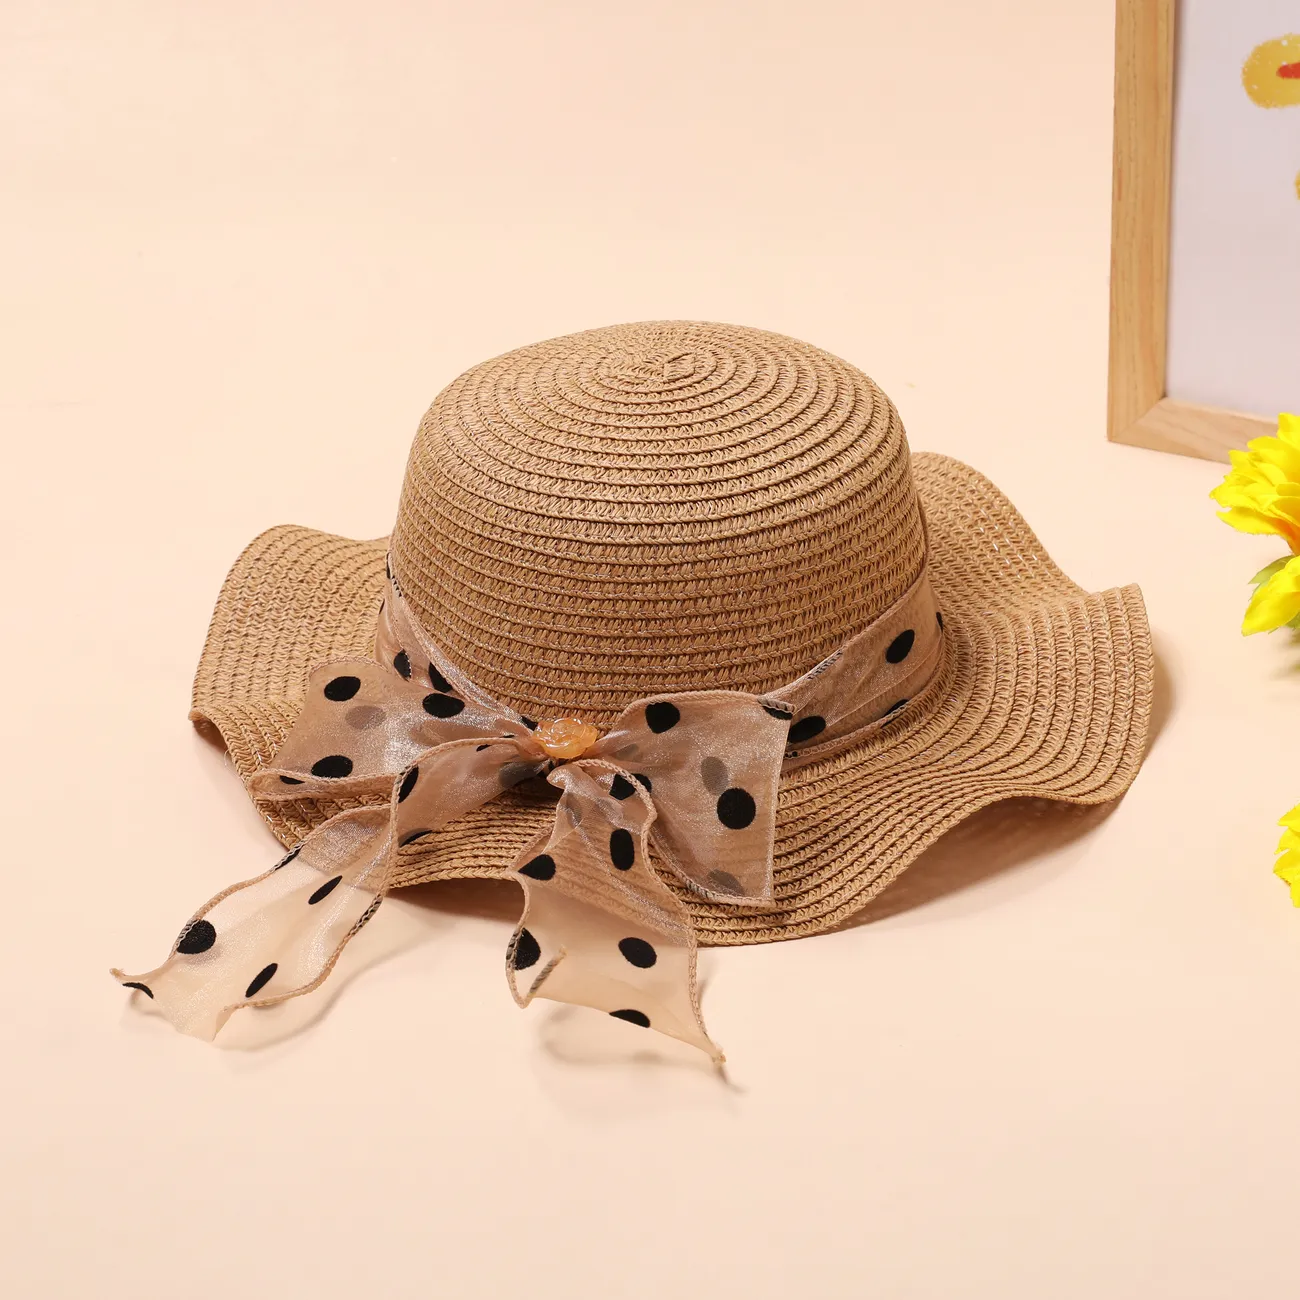 Summer Girls' Straw Hat with Polka Dot Ribbon for Beach and Sun Protection, Ages 2-5 Khaki big image 1